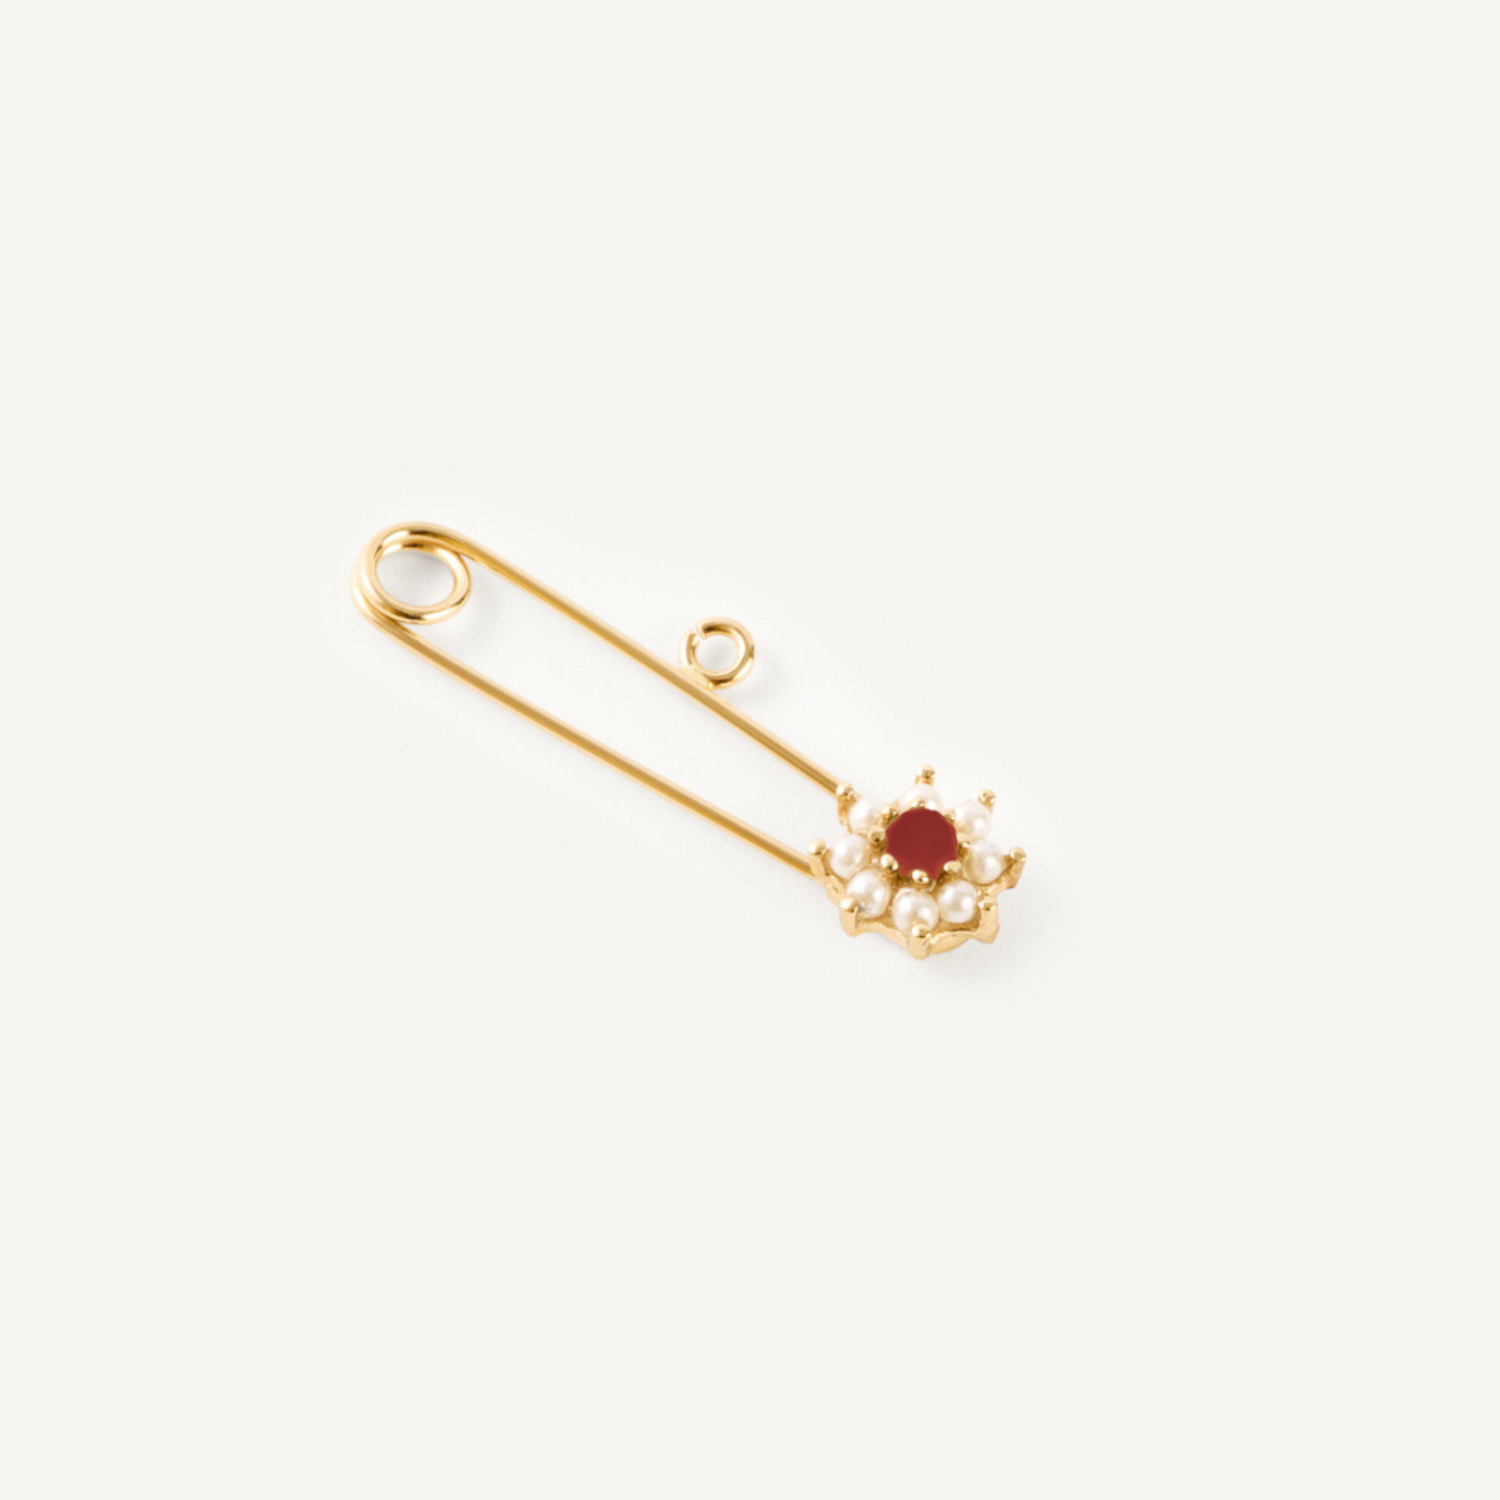 'NOLA' Pearl & Coral Flower BABY PIN